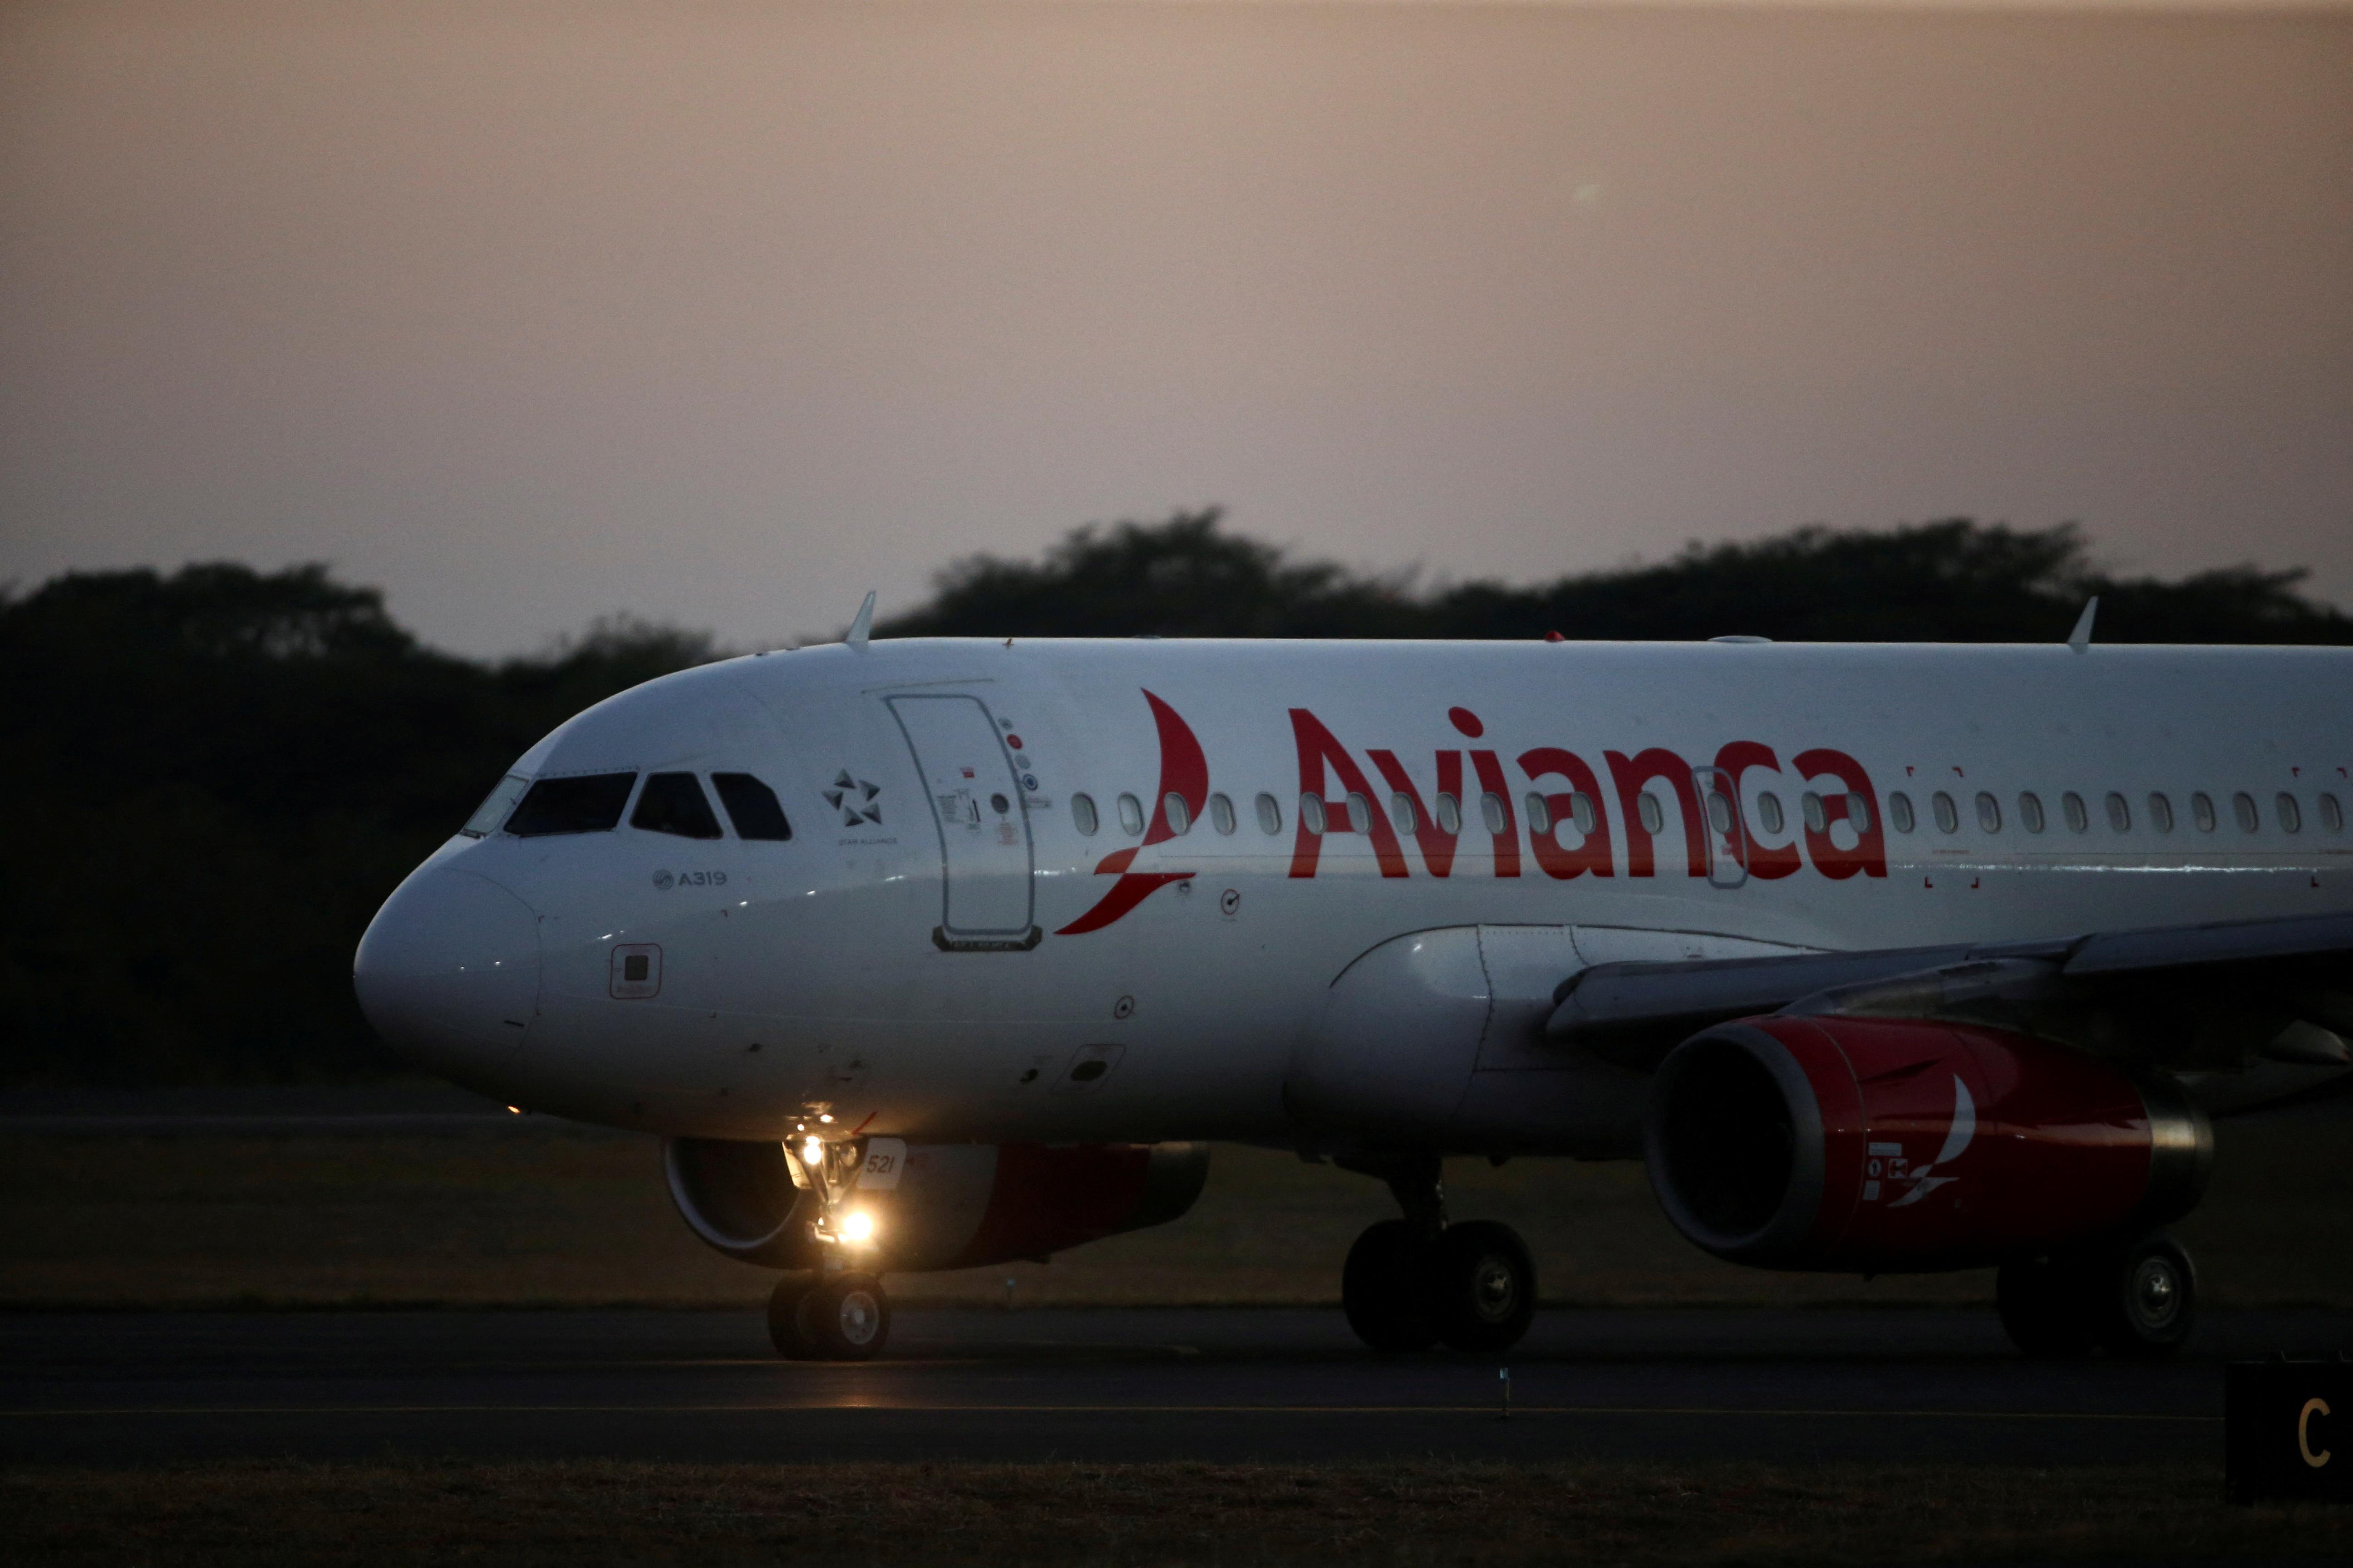 Colombia S Avianca To Merge With Low Cost Airline Viva Reuters